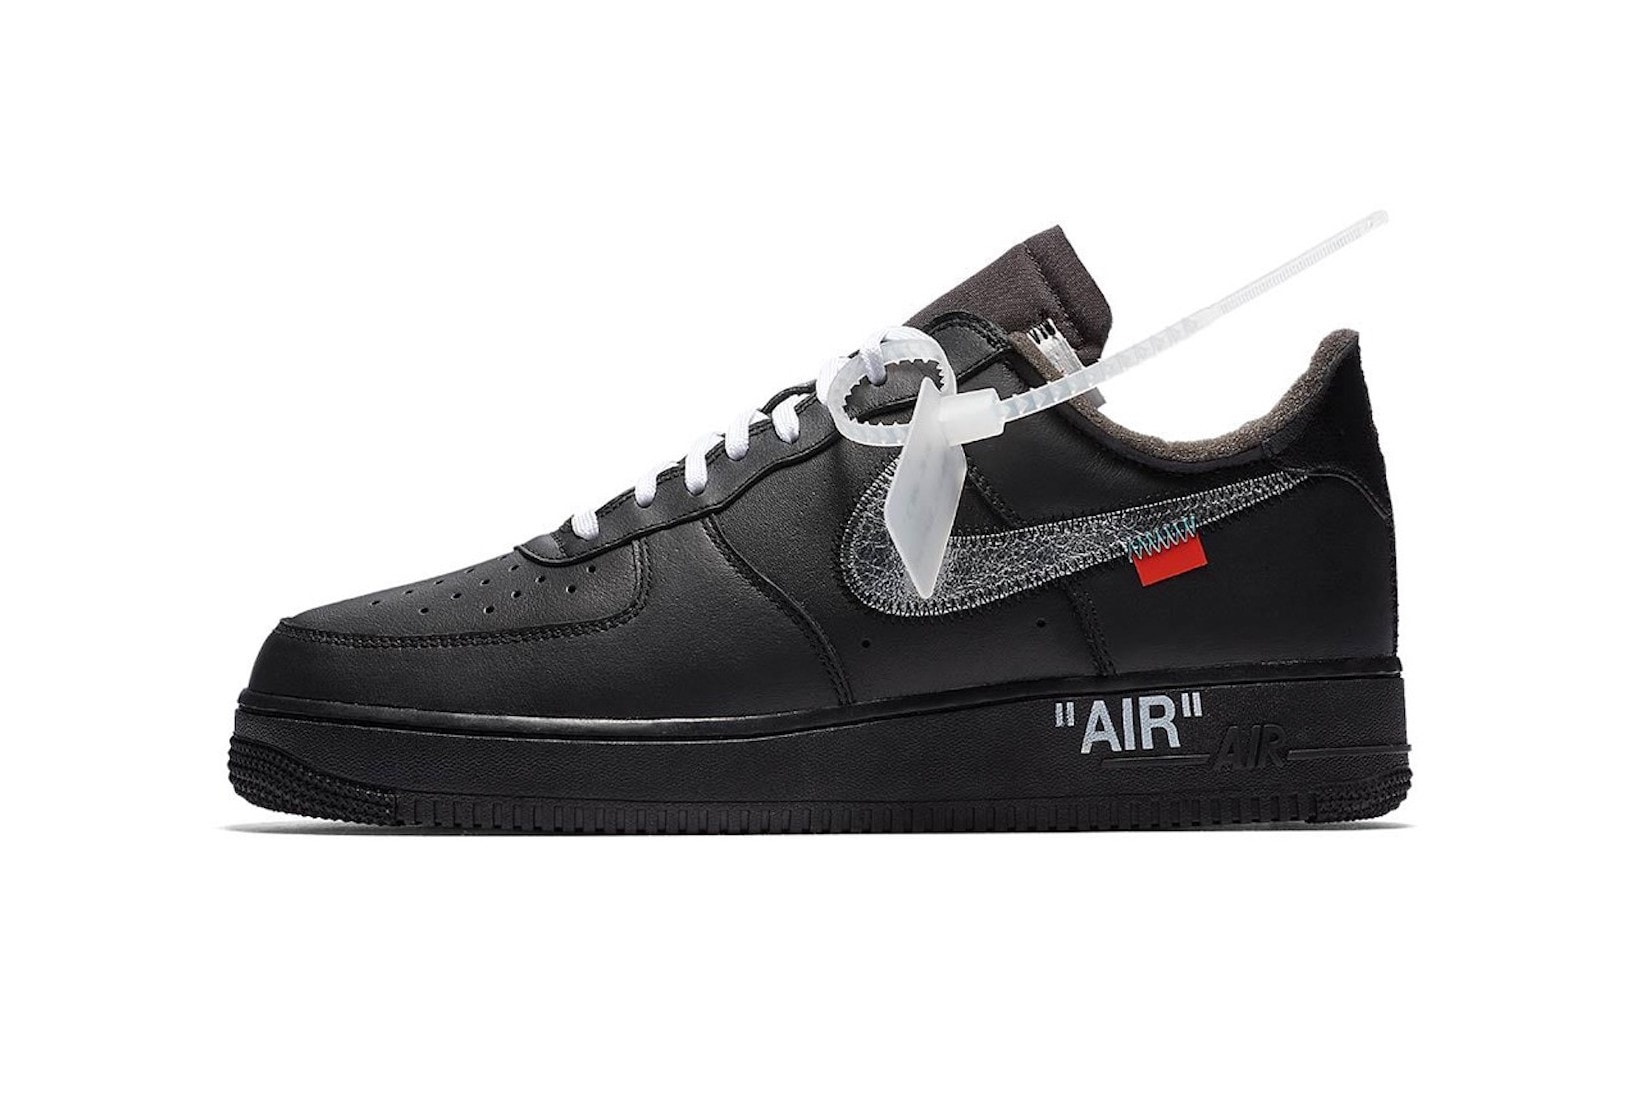 Off-White AF1 MoMA! What are your thoughts on these! #fyp #sneakers